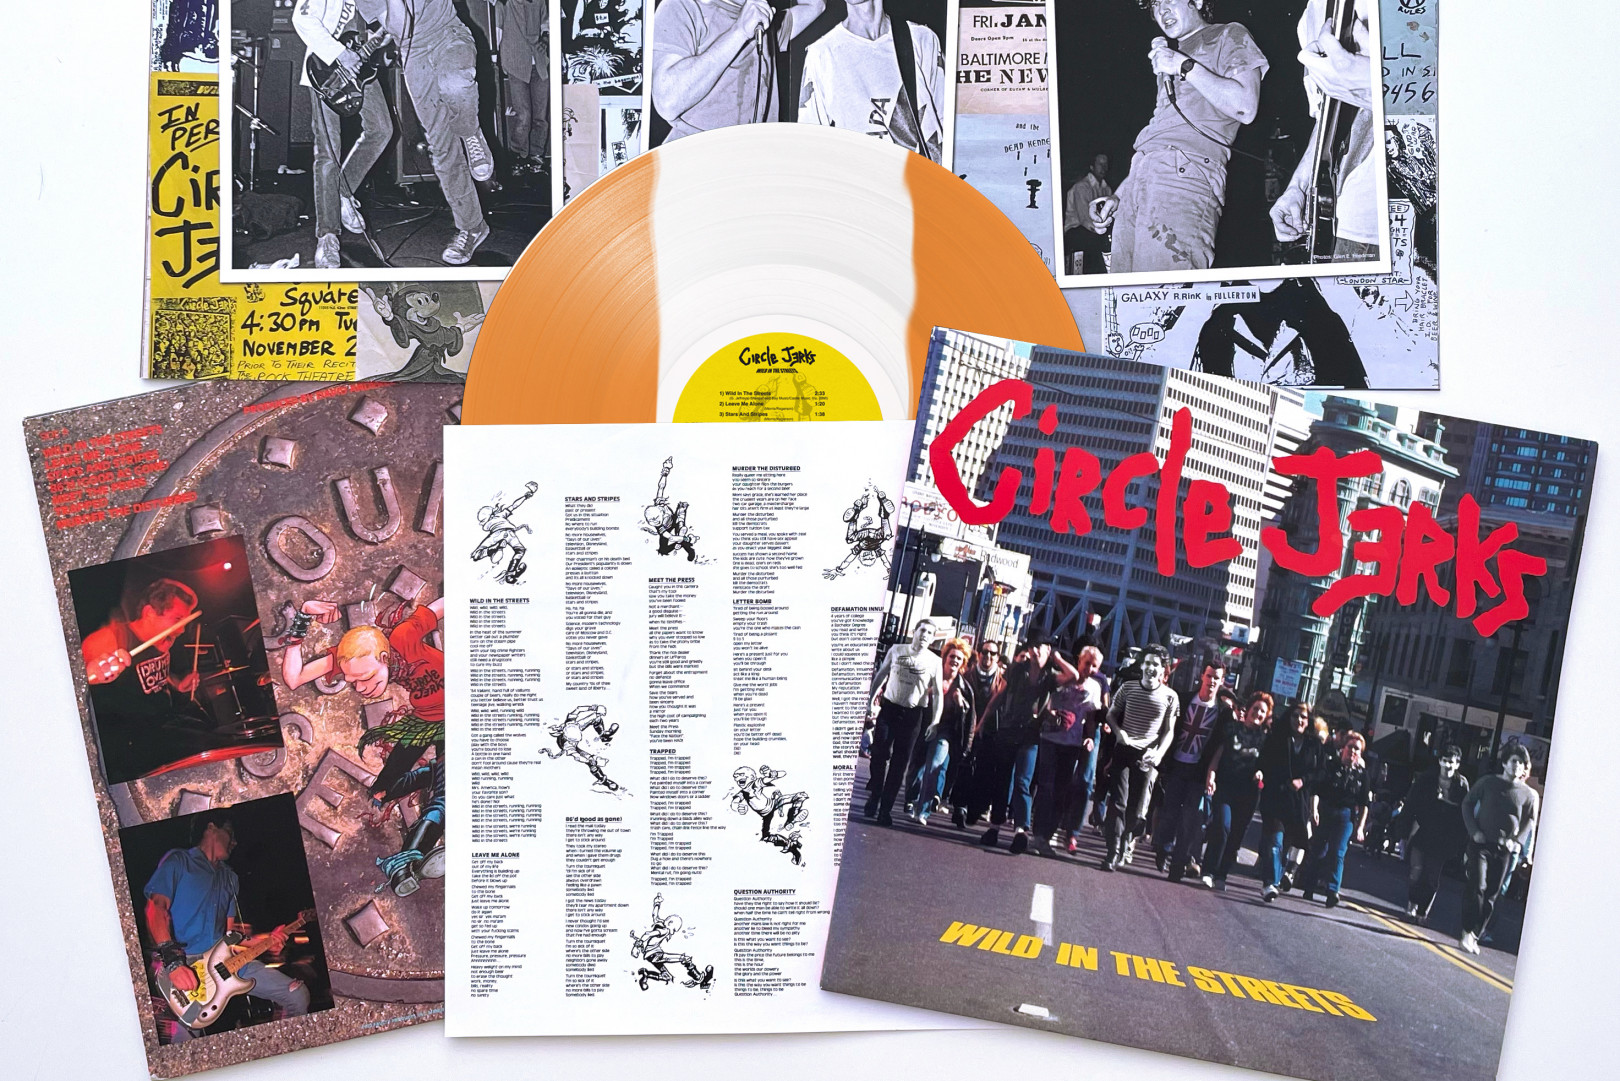 Circle Jerks detail 'Wild in the Streets' reissue, release video